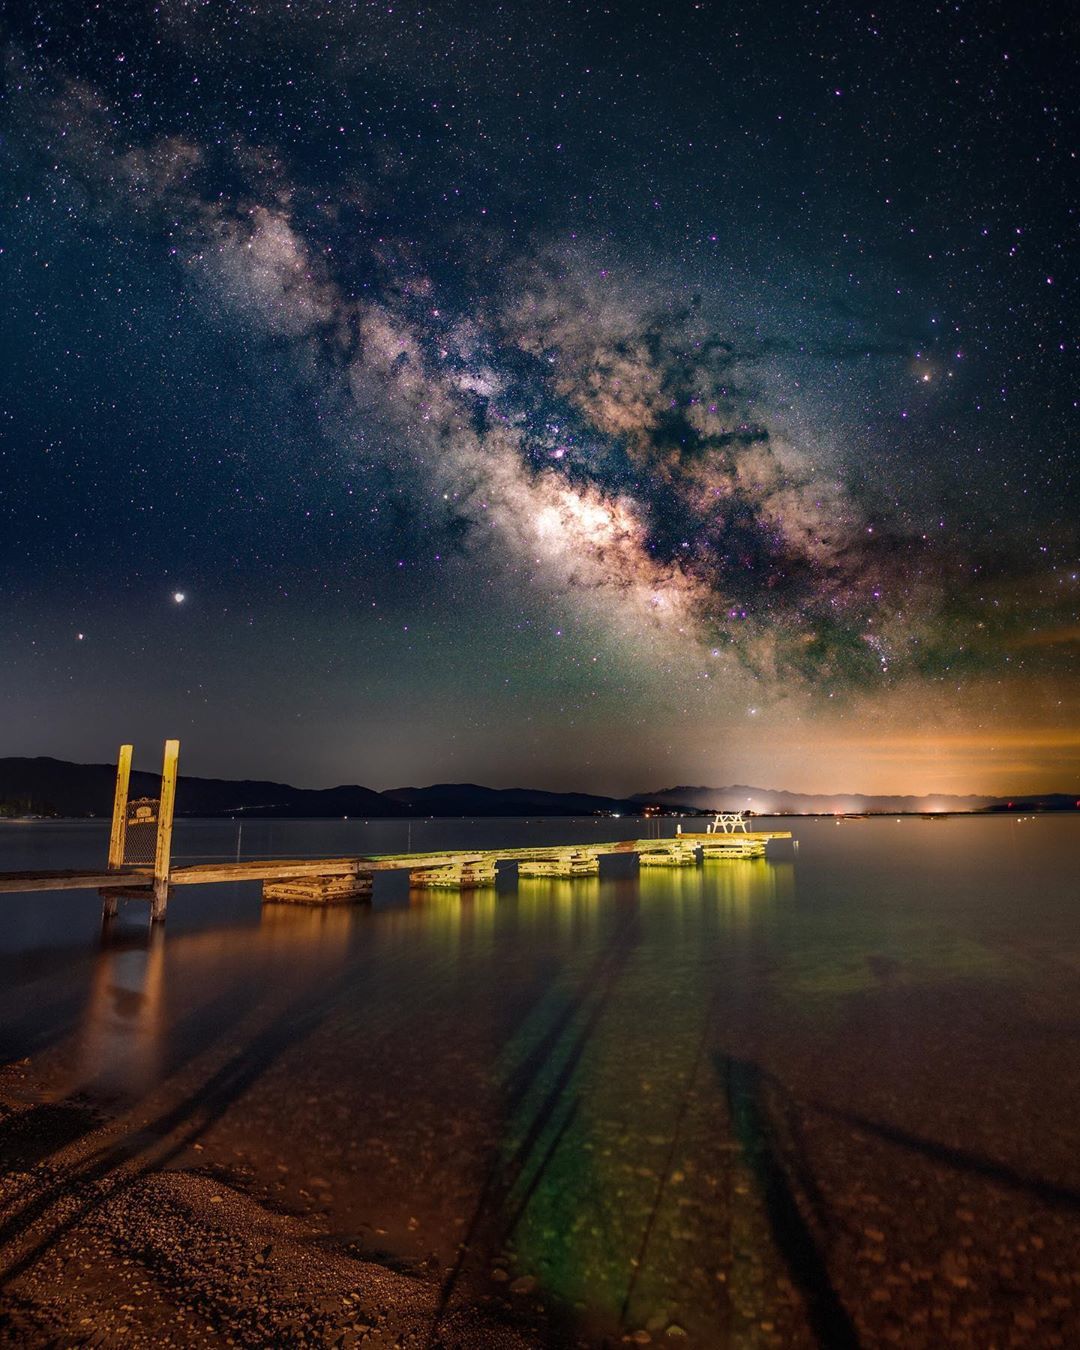 Photograph of starry night sky above pier extending into Lake Tahoe